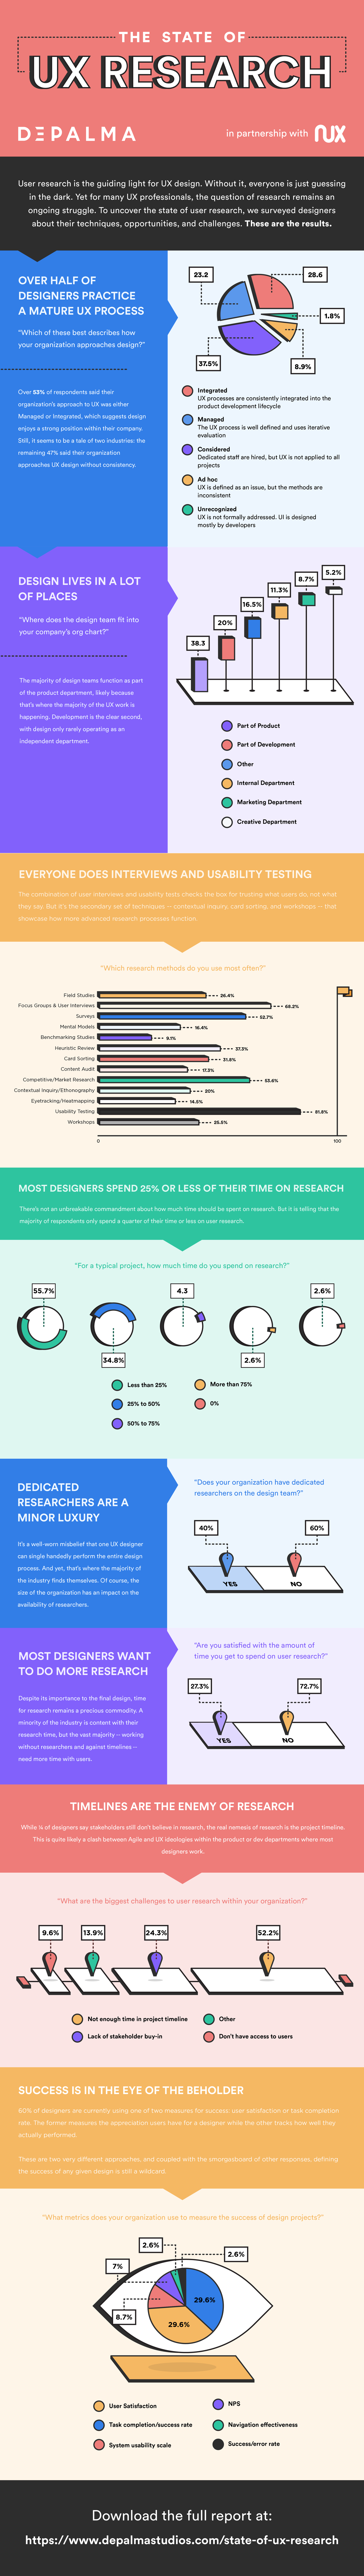 State of UX Research Infographic